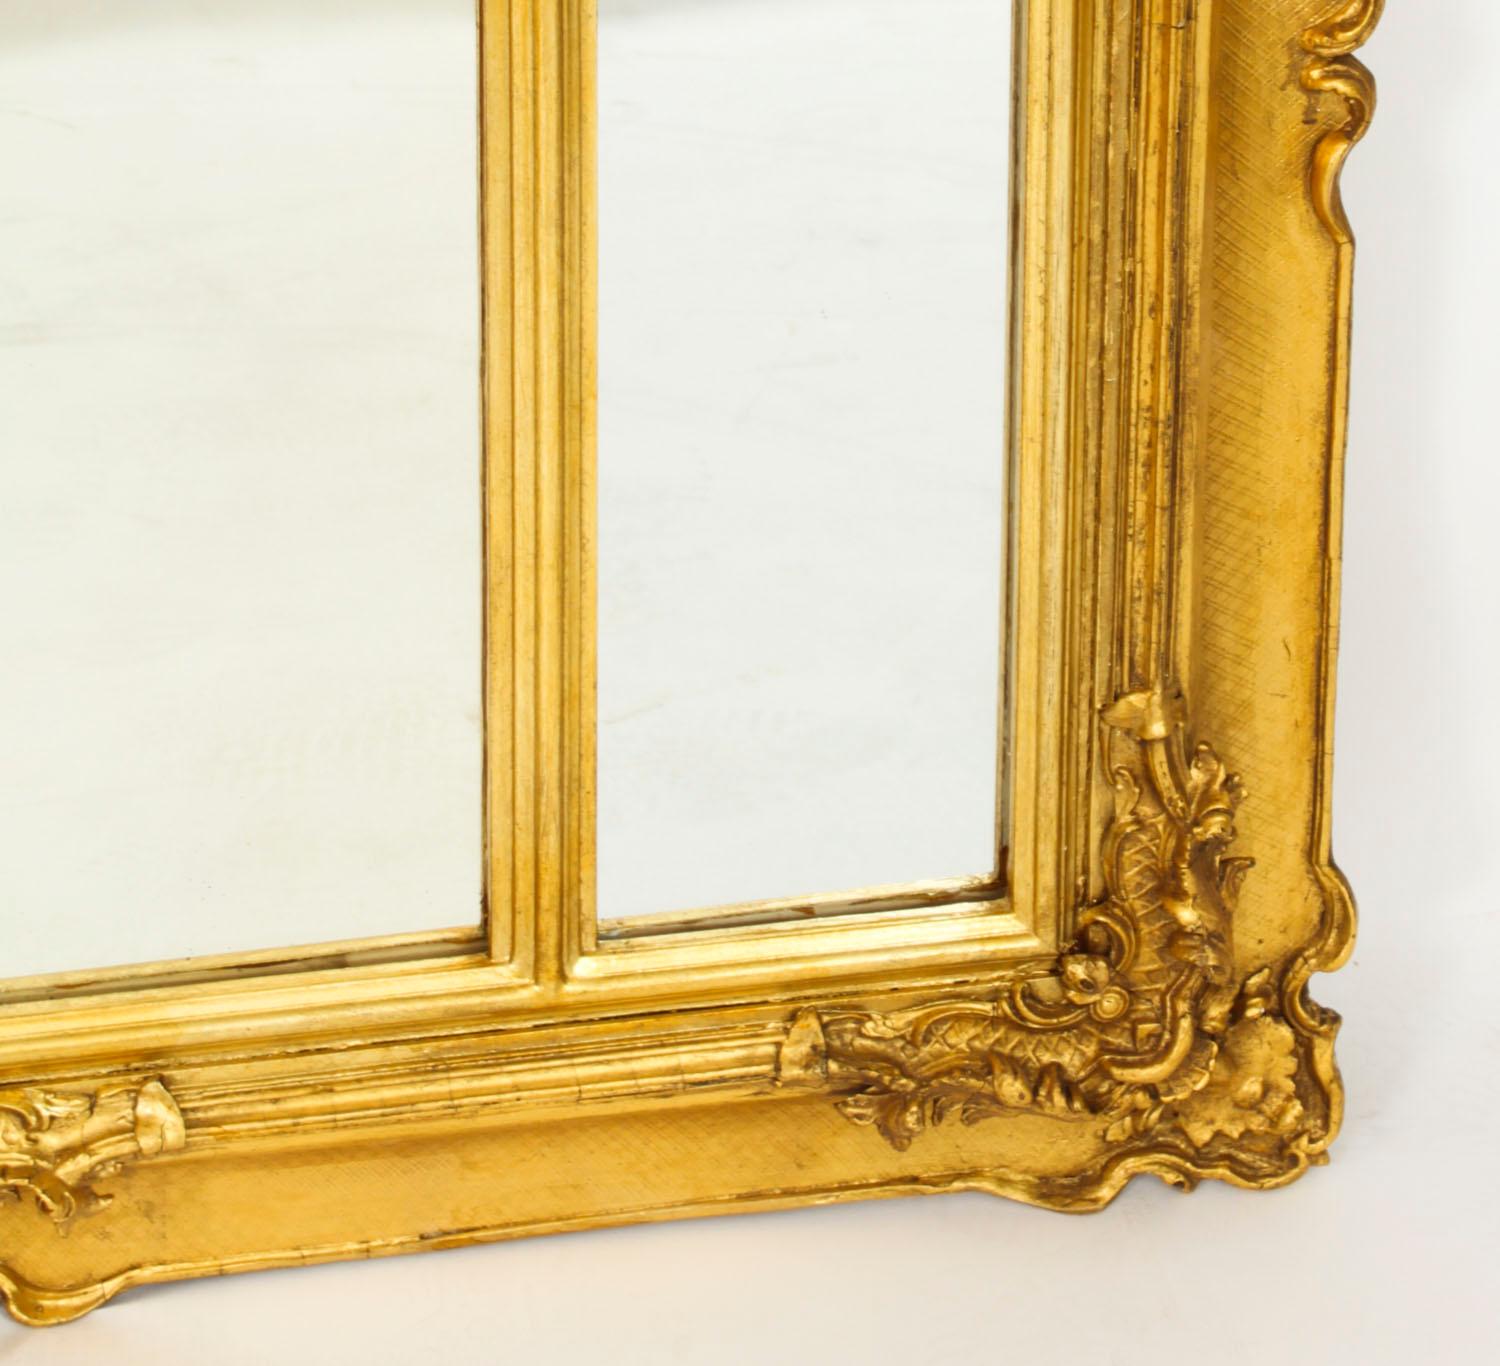 Antique French Painted & Parcel Gilt Trumeau Mirror 19th Century For Sale 7